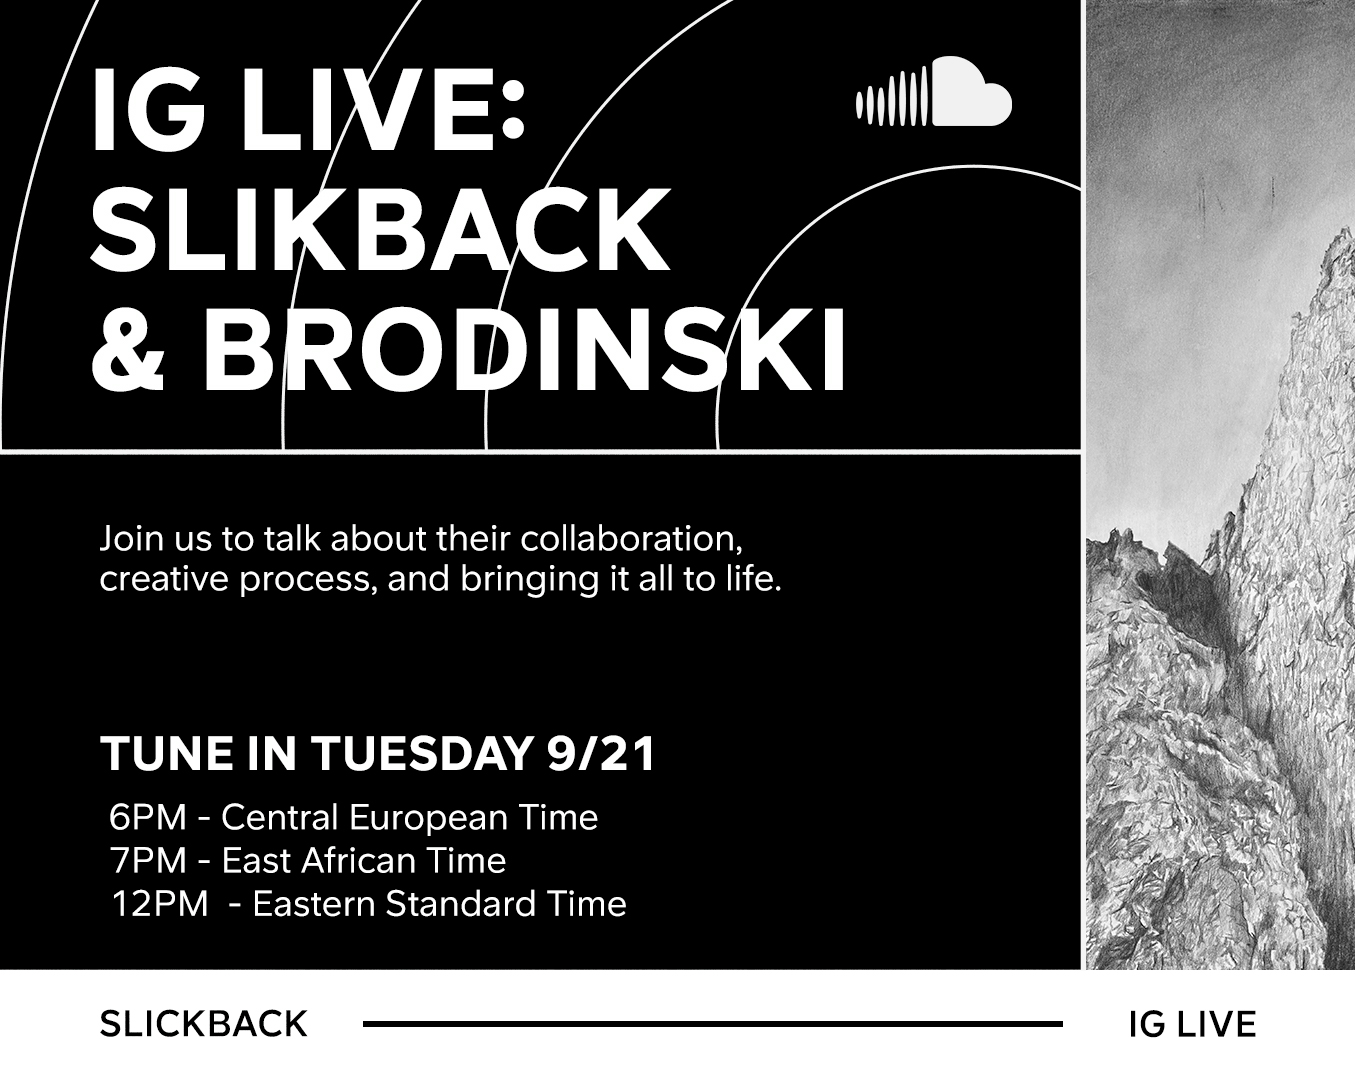 SoundCloud on "To celebrate the release of Slikback's album "MELT" - we are hosting @slikback &amp; @Brodinski LIVE on Instagram to dig into the project, the creativity involved, and the